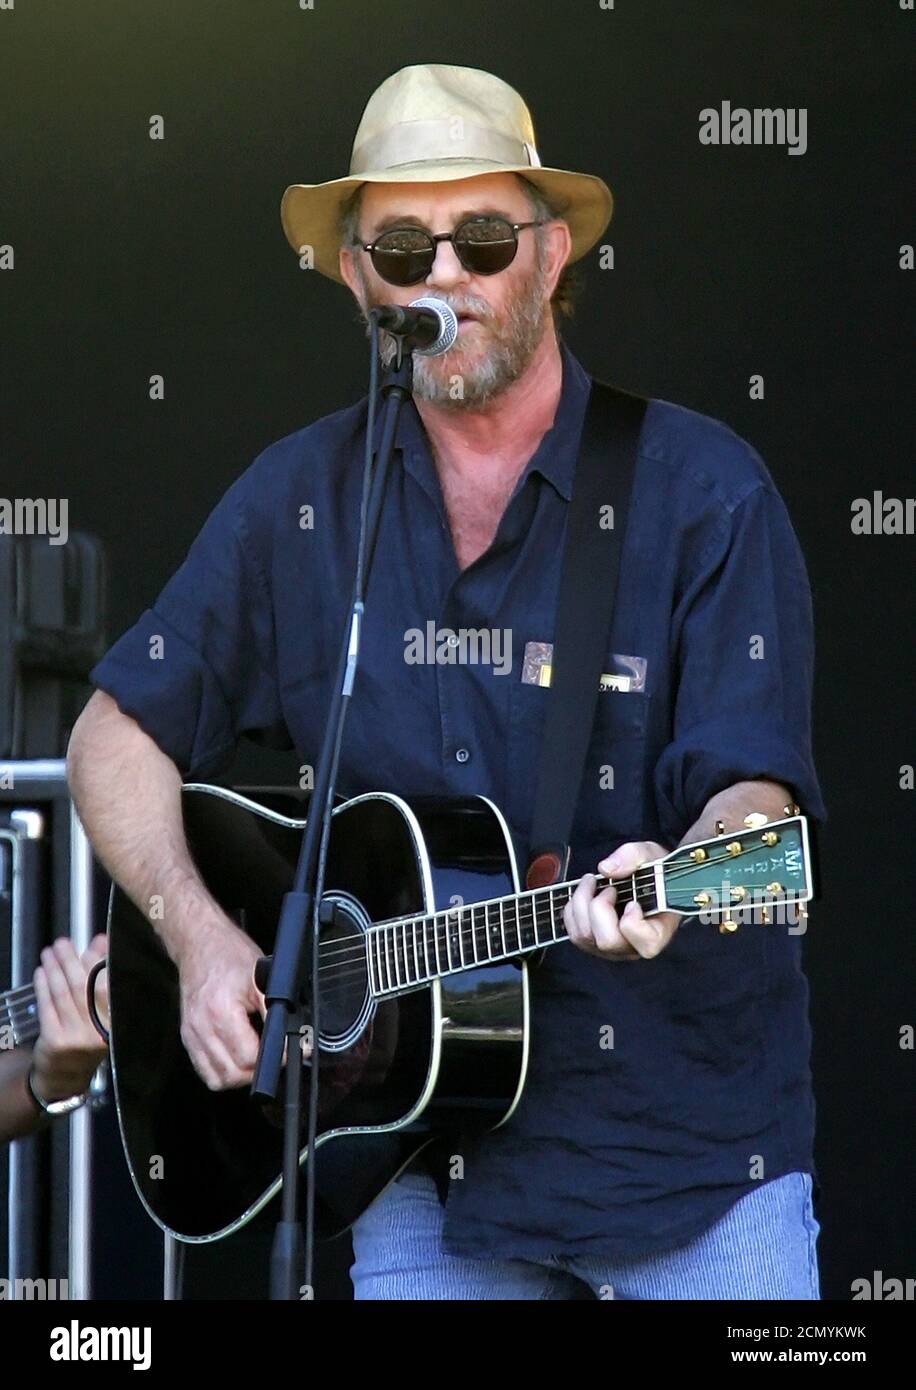 Italian artist Francesco De Gregori performs at Live 8 Italy concert inside  Rome's ancient Circus Maximus July 2, 2005. A galaxy of rock and roll stars  will grace stages across the globe